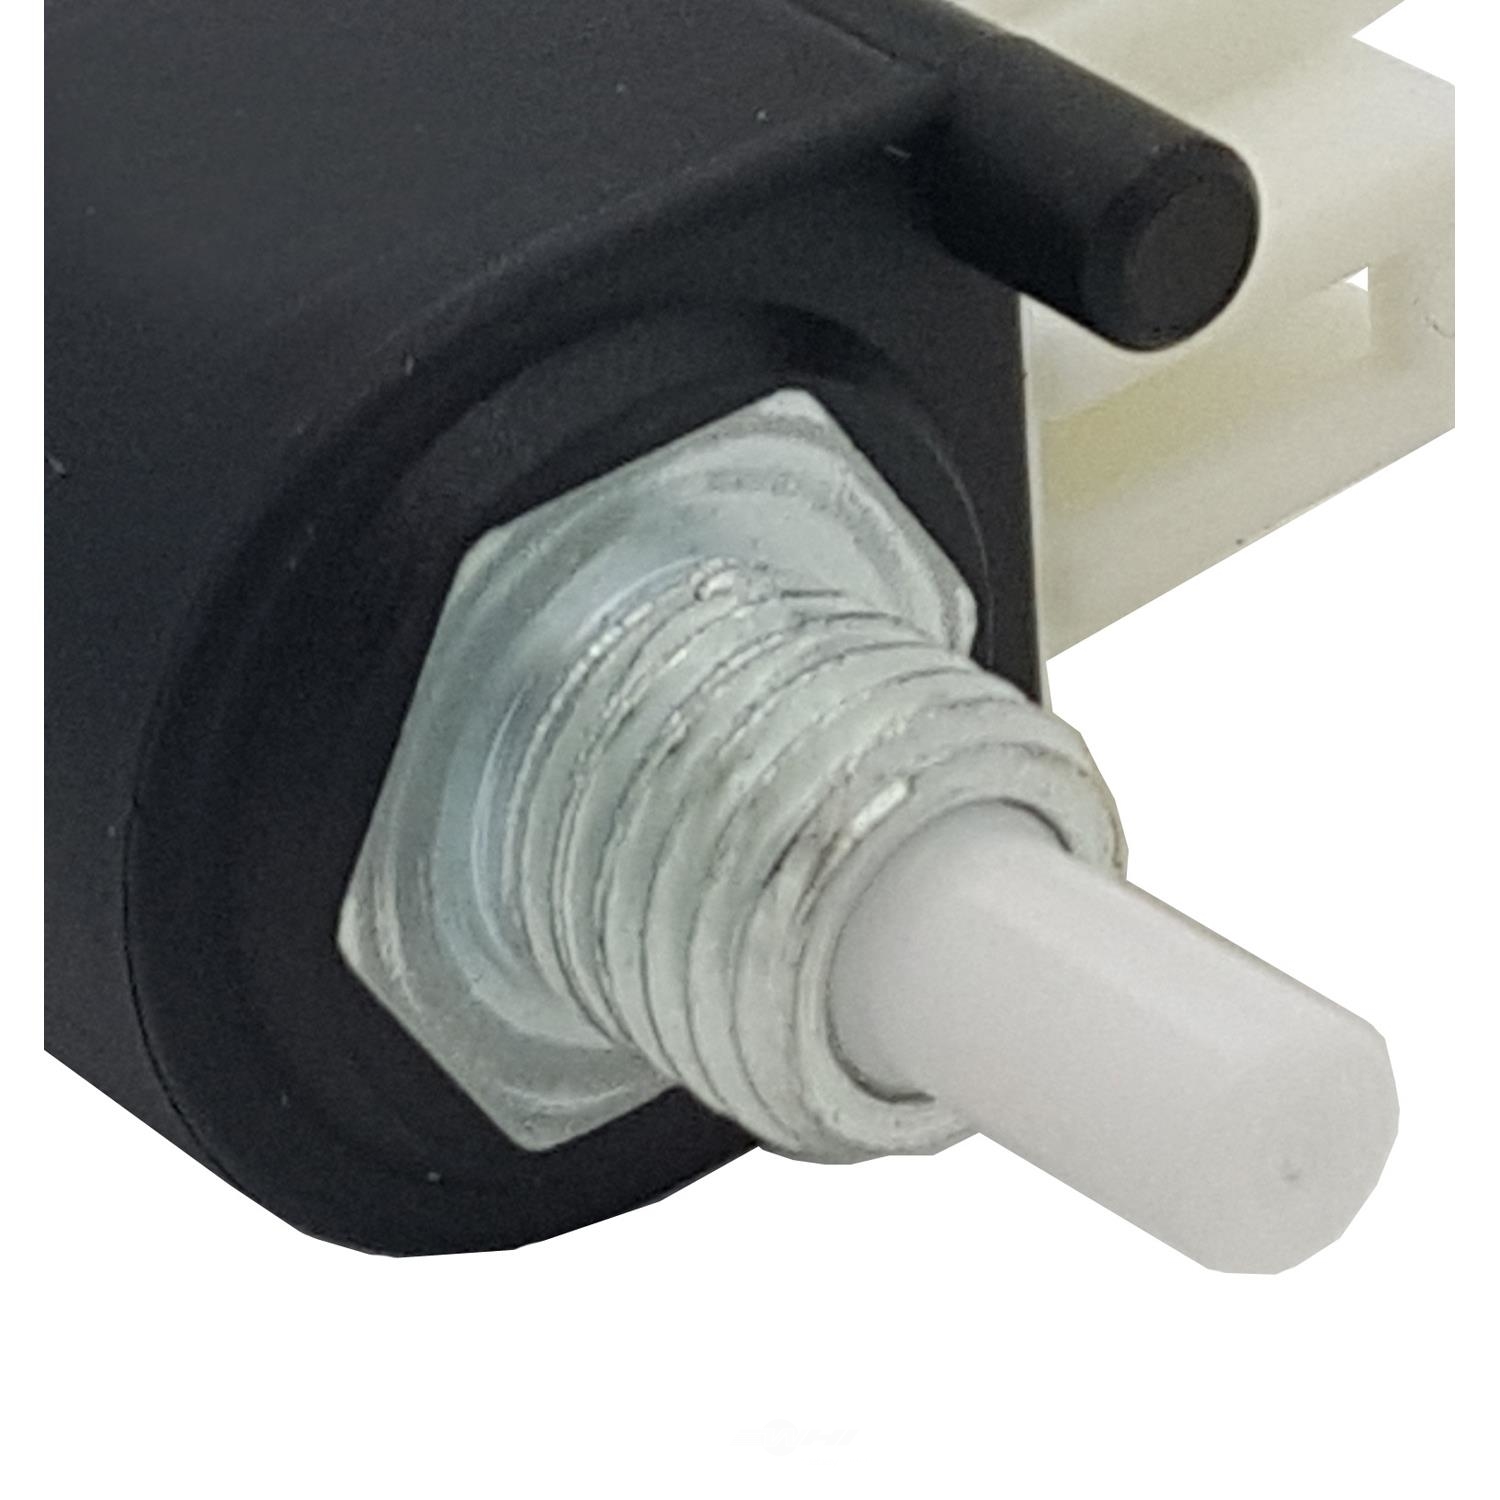 STANDARD T-SERIES - Cruise Control Release Switch - STT NS149T